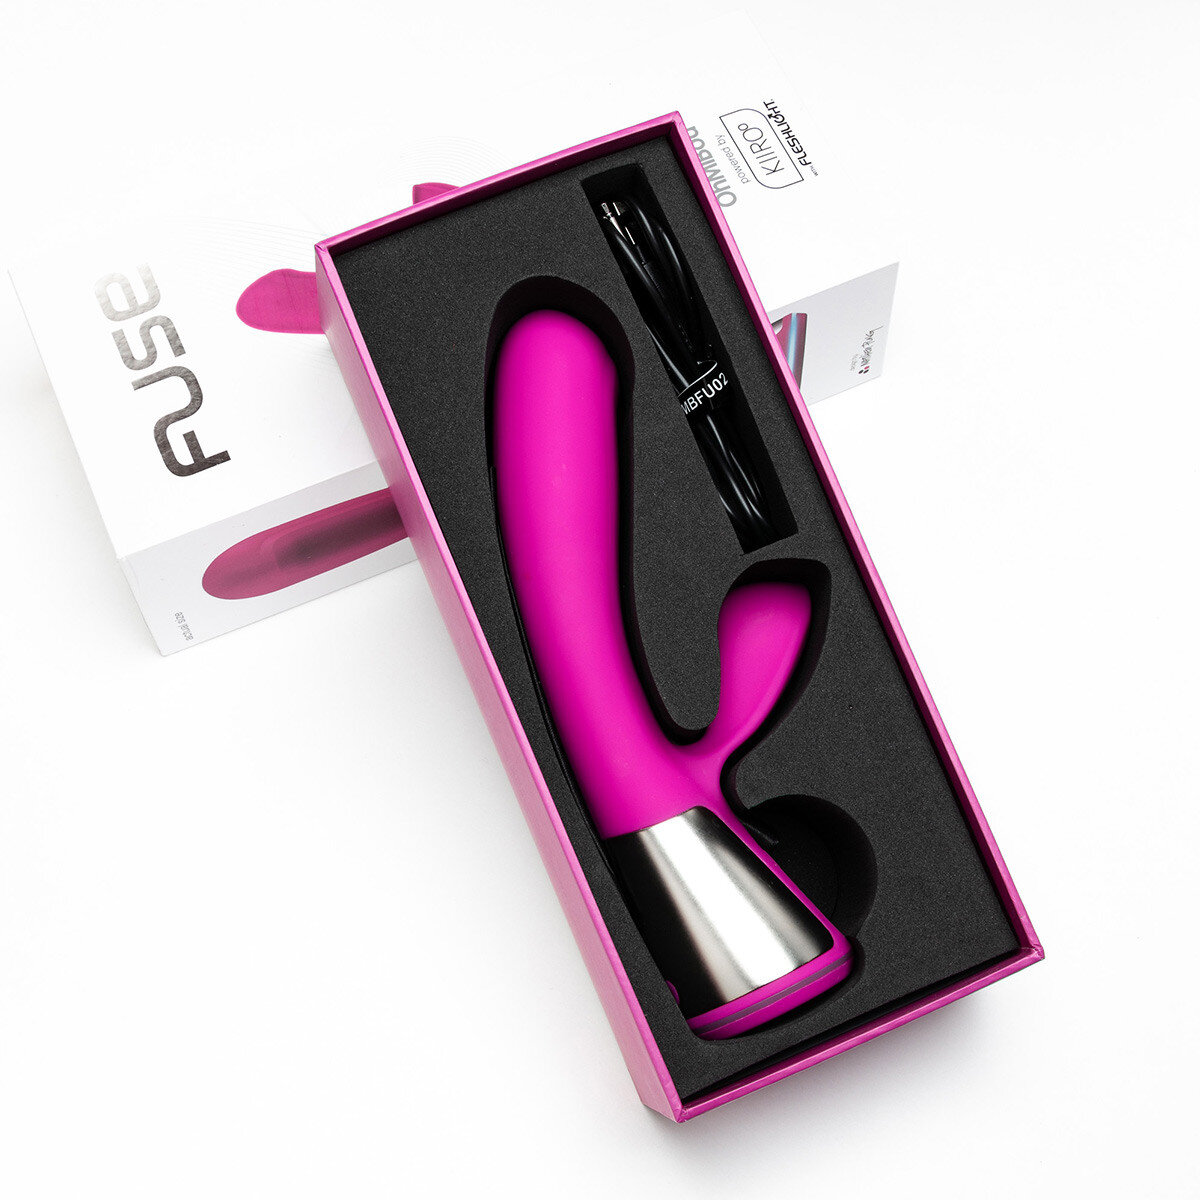 Fuse by OhMiBod (online store)